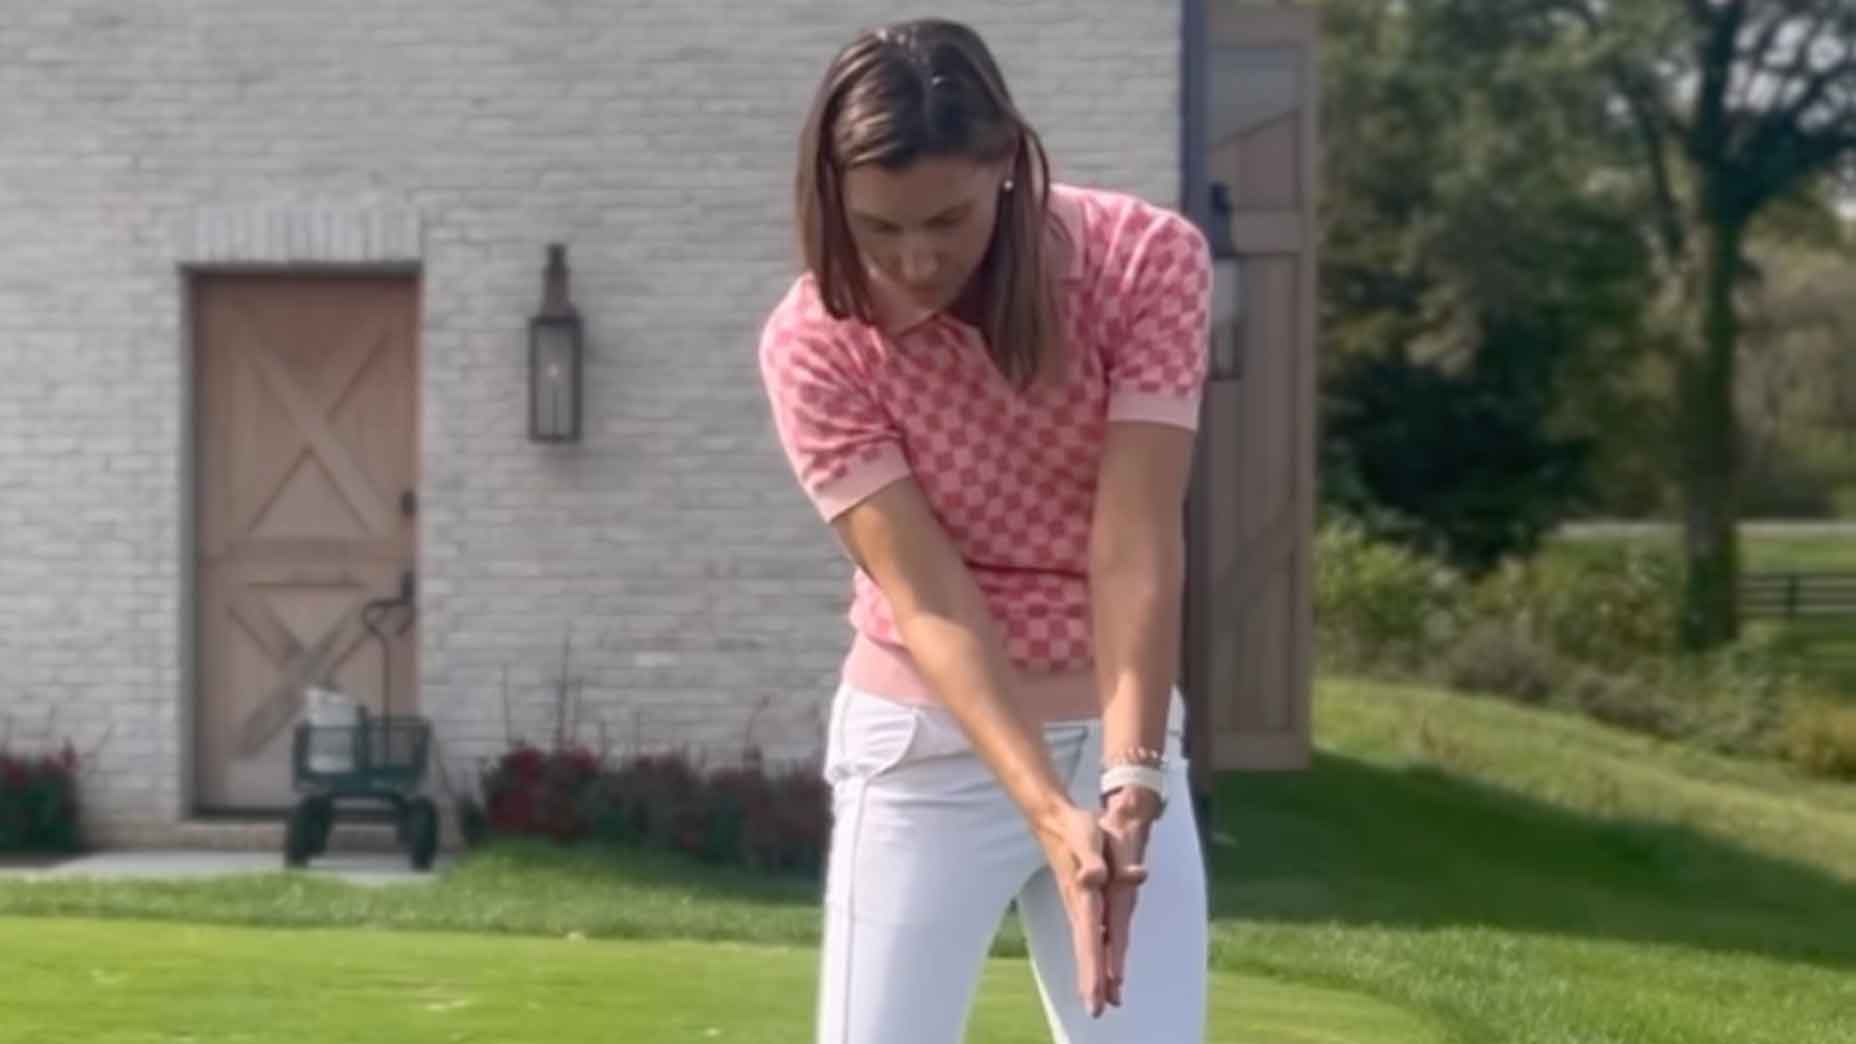 GOLF Top 100 Teacher Erika Larkin shares two different drills that will help correct your golf slice and lead to straighter shots